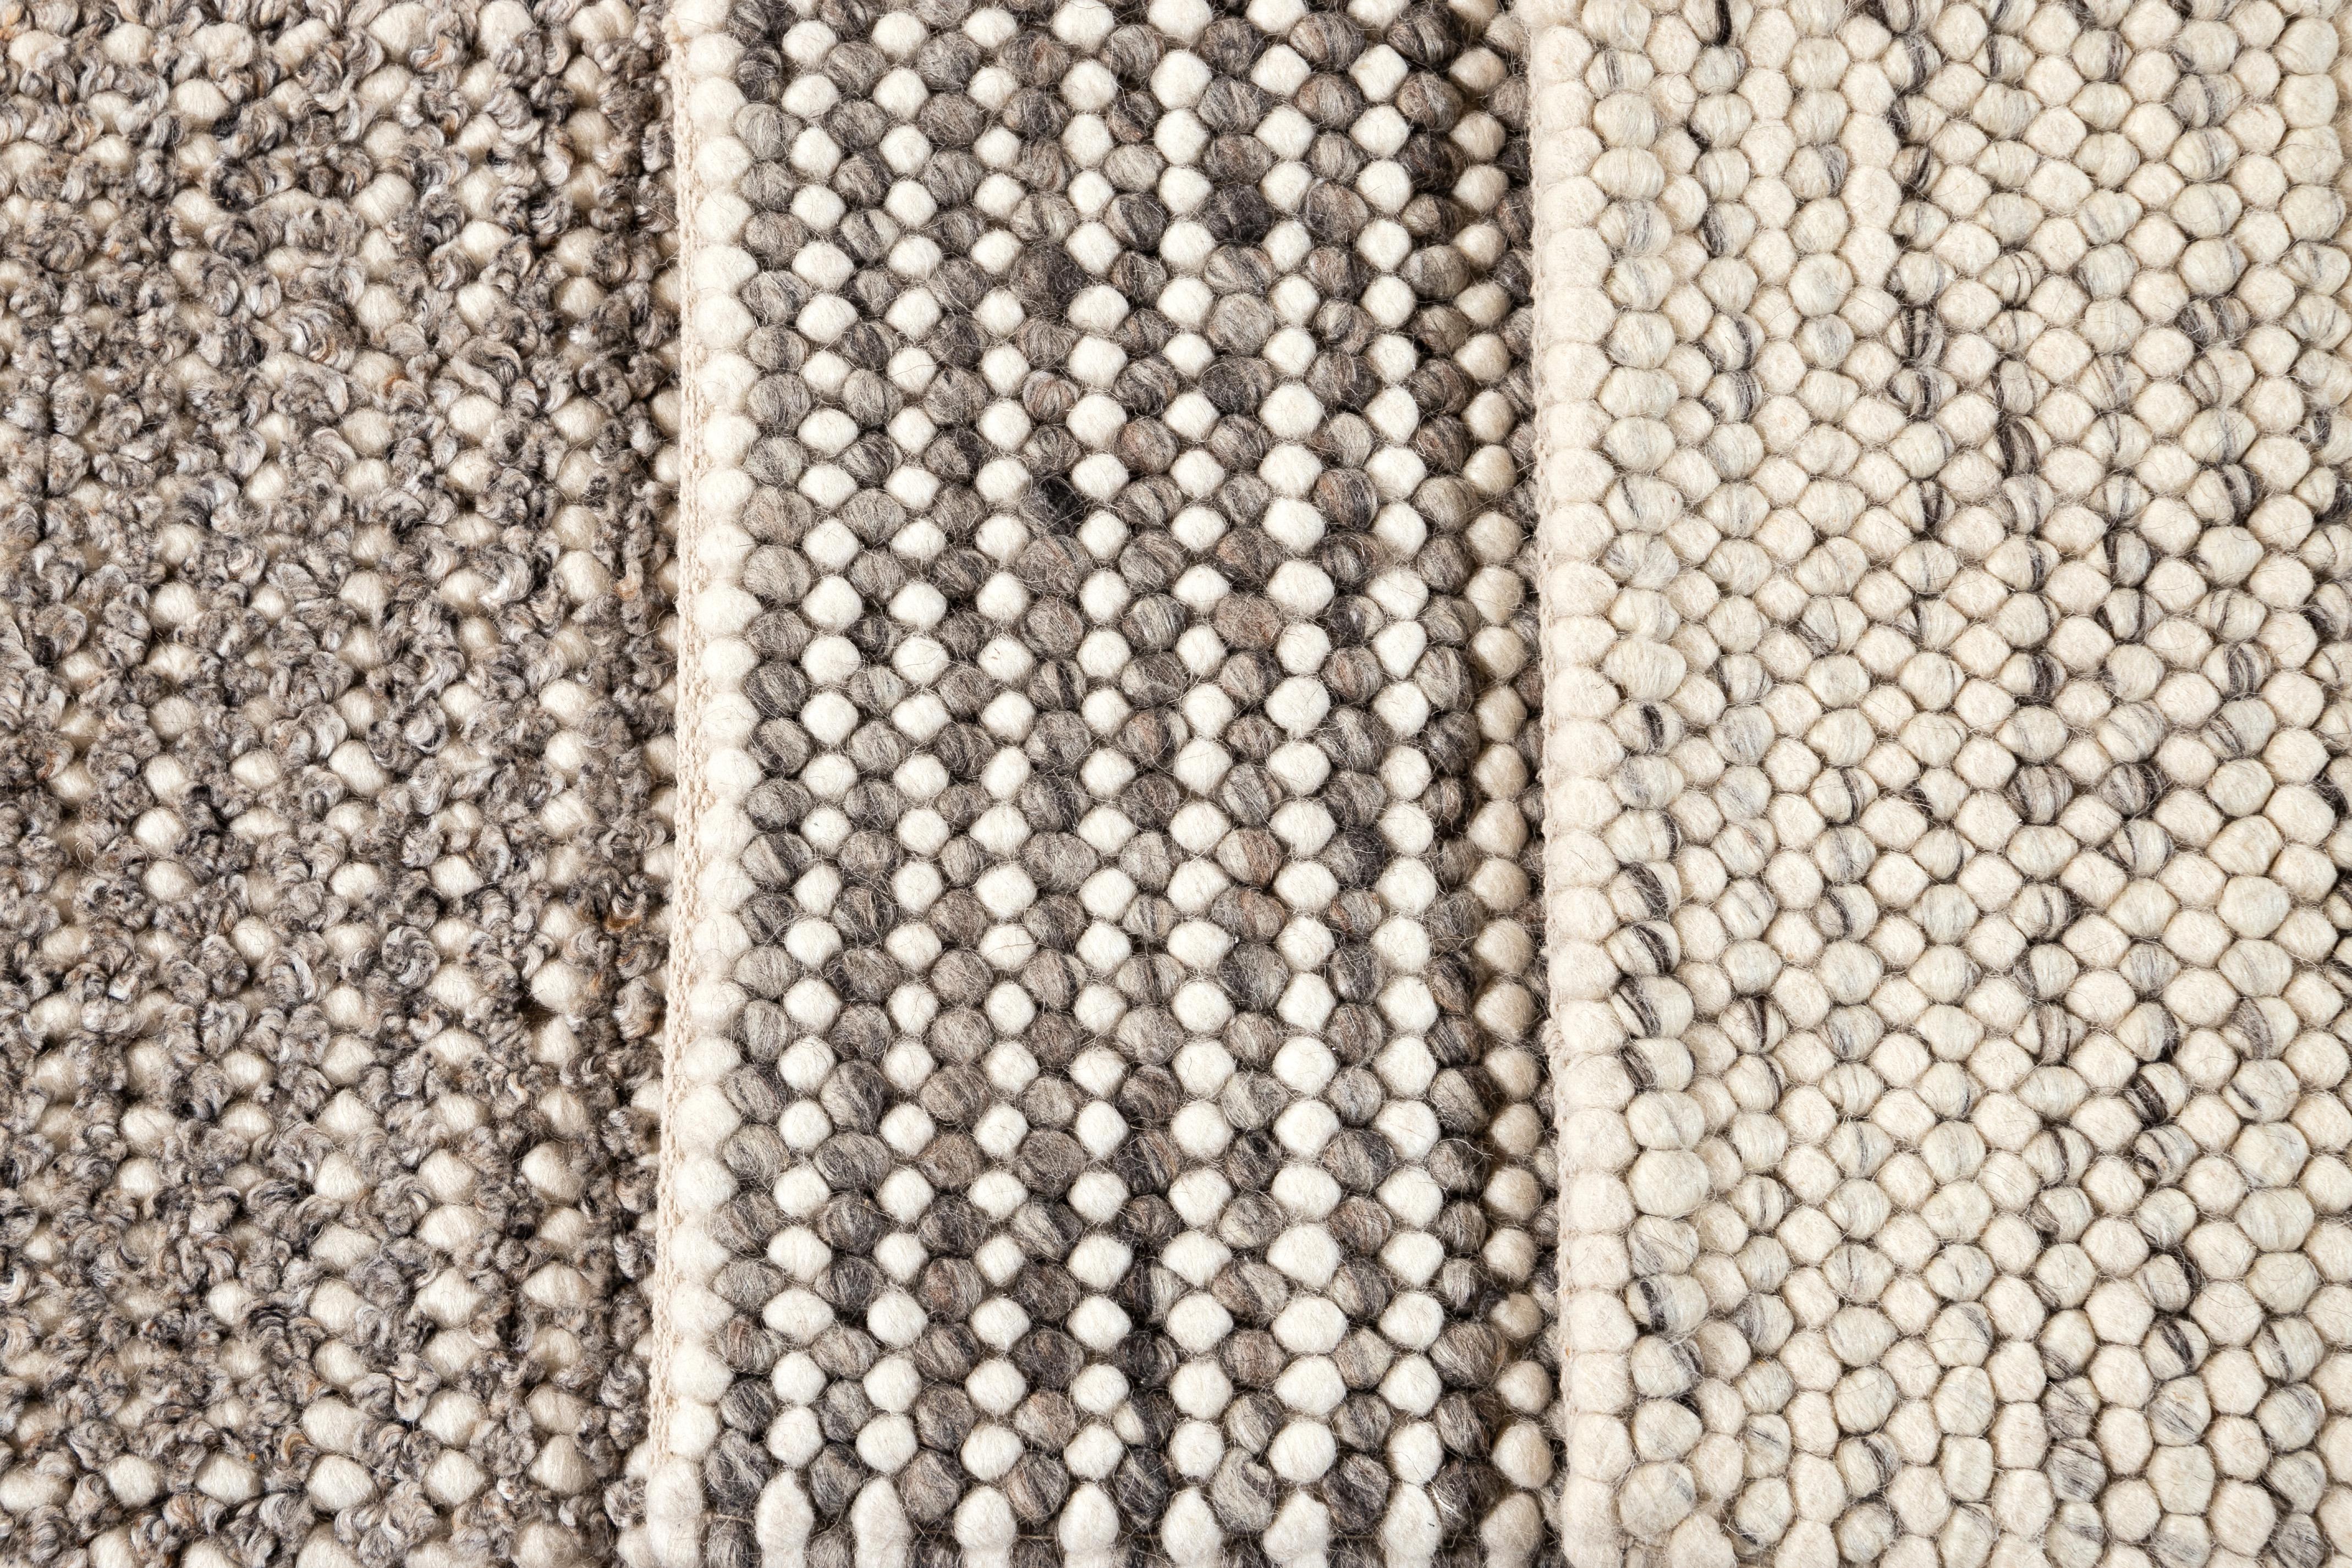 Solid-colored woven wool textured custom rug in varying neutral shades. Custom sizes and colors made to order.

Collection: Easton
Material: 100% wool
Lead Time: Approximate 12 weeks
Available colors: Greige, grey, Lt. Silver
Made in